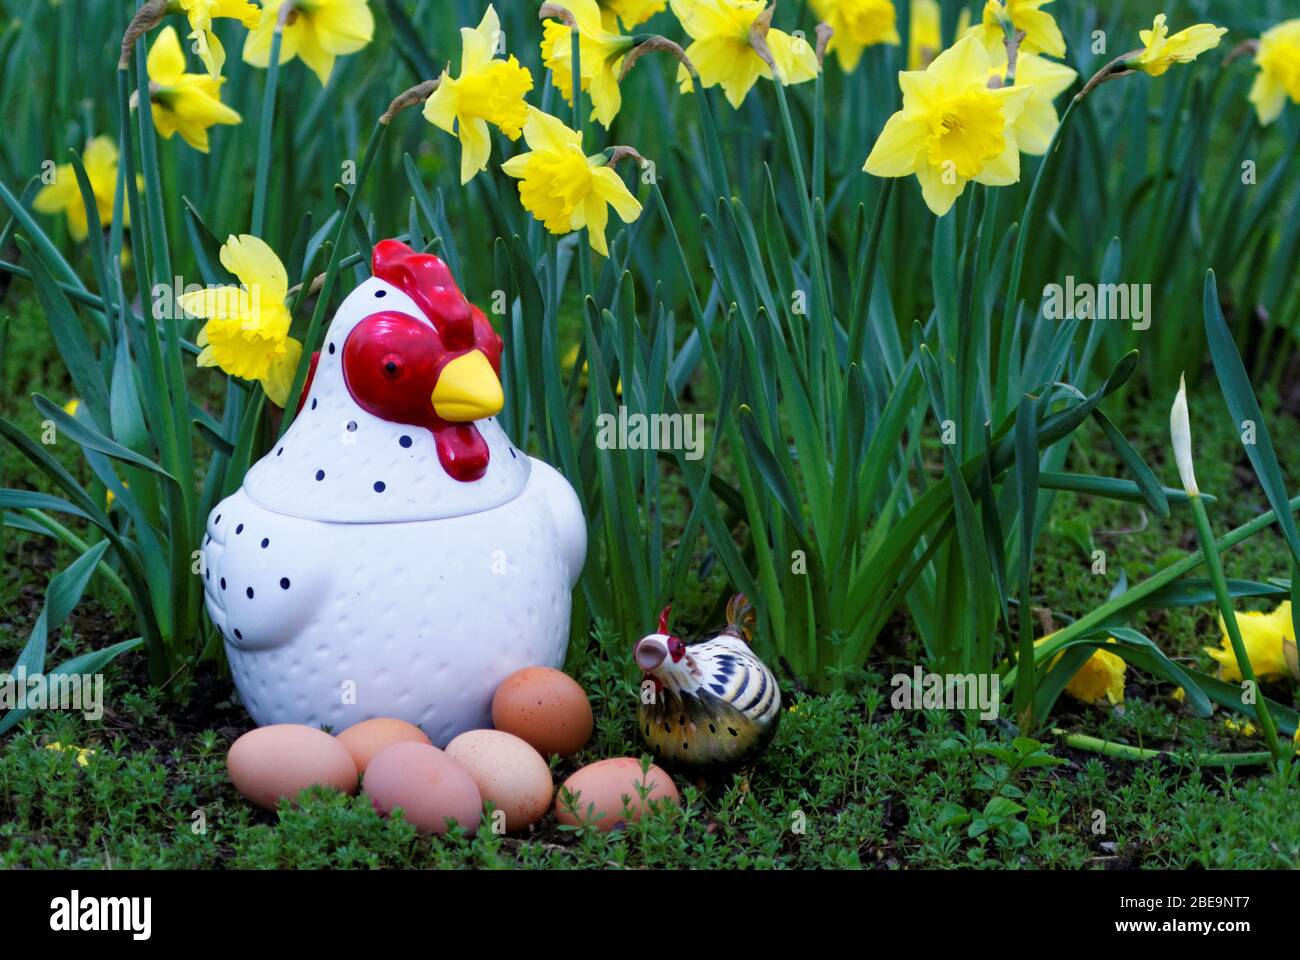 Ceramic hens and real eggs with a background of daffodils indicating Easter Stock Photo